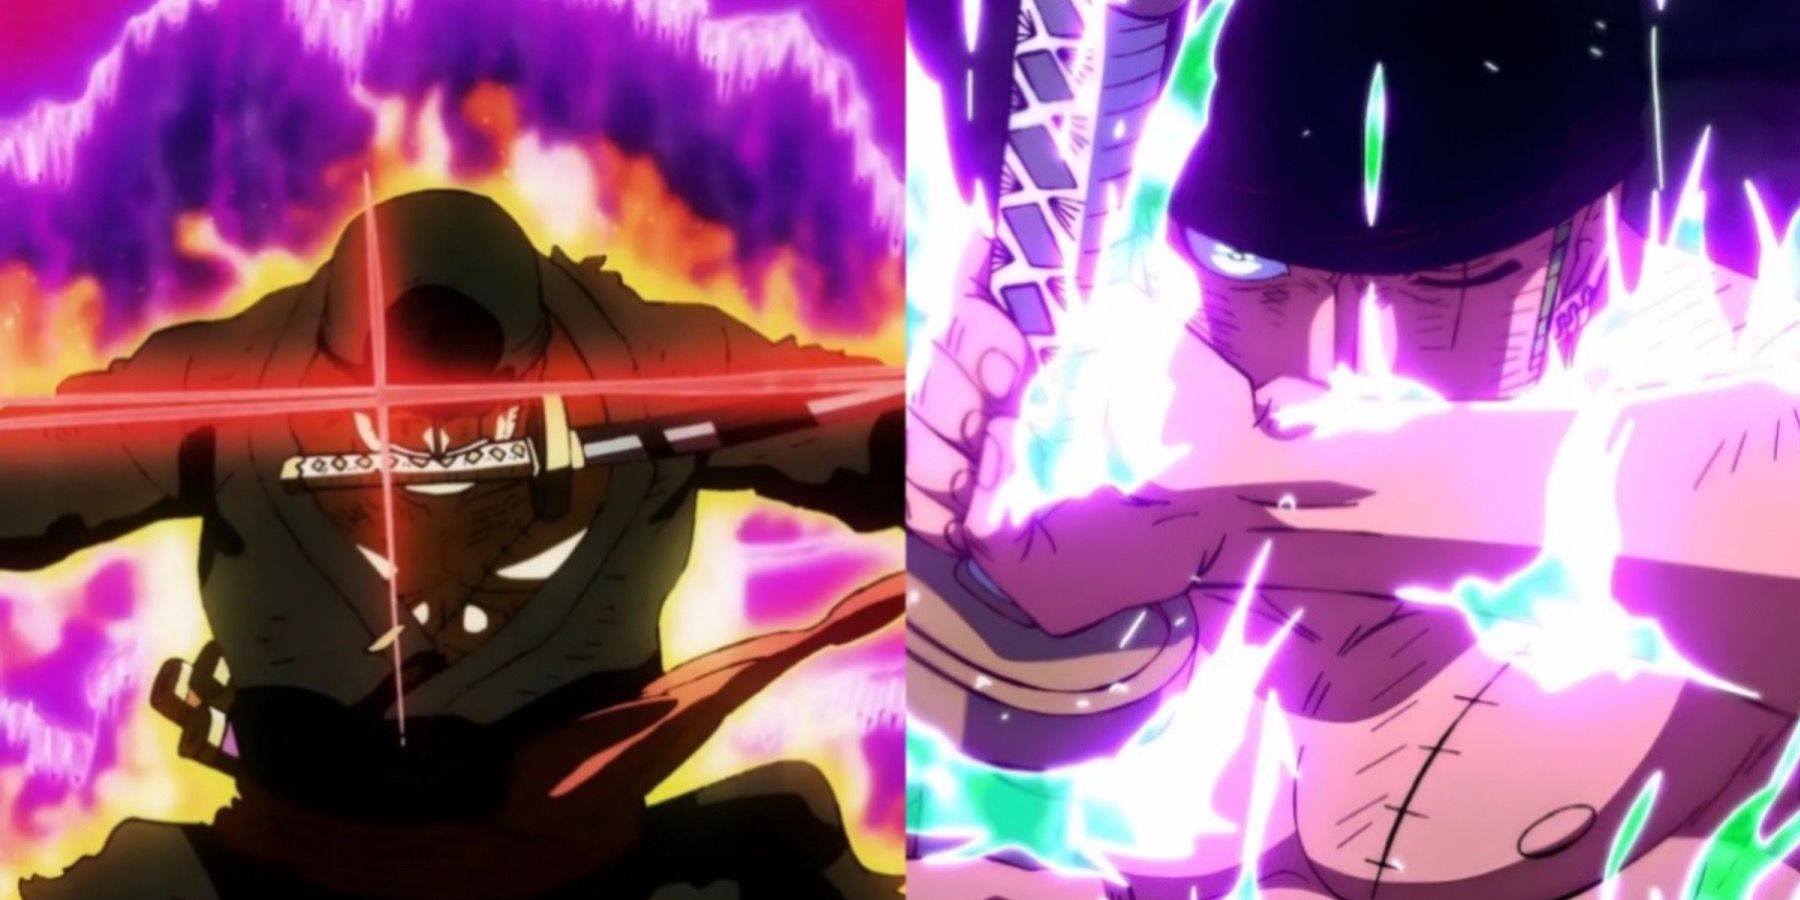 Zoro FINALLY Conquers His First BLACK BLADE (Kings Haki) ?! - One